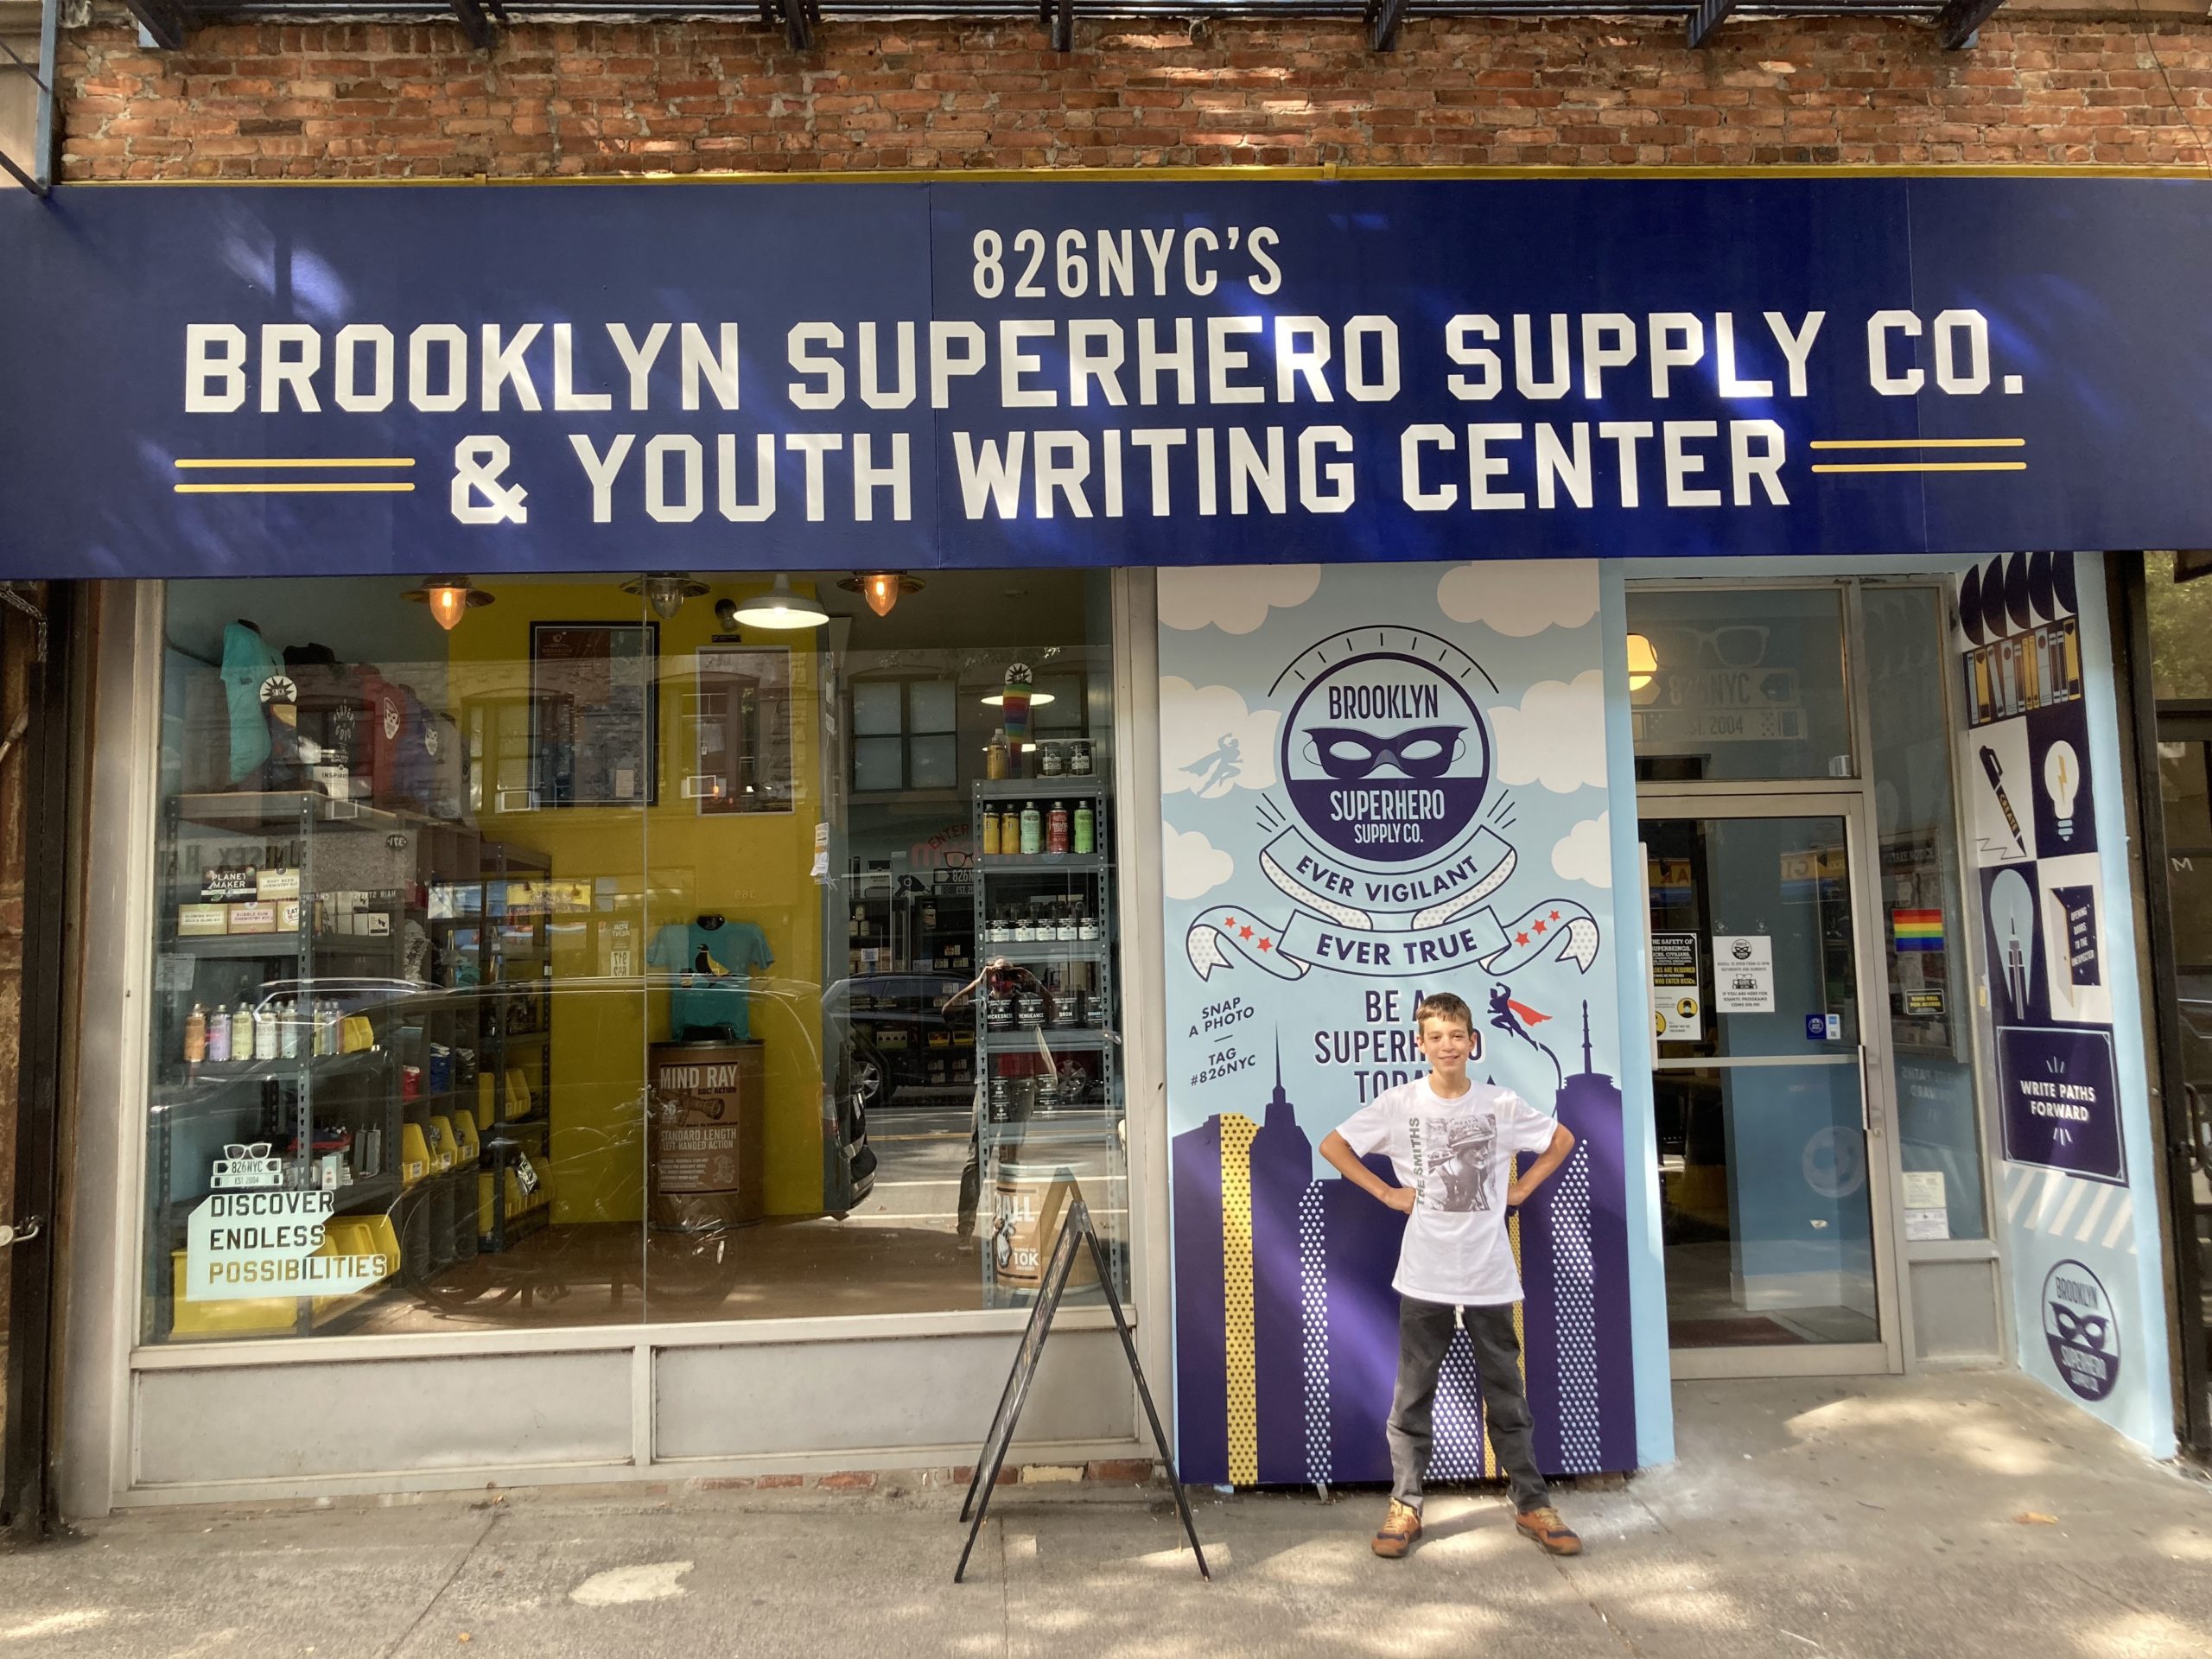 The new Brooklyn Superhero Supply Co. Storefront